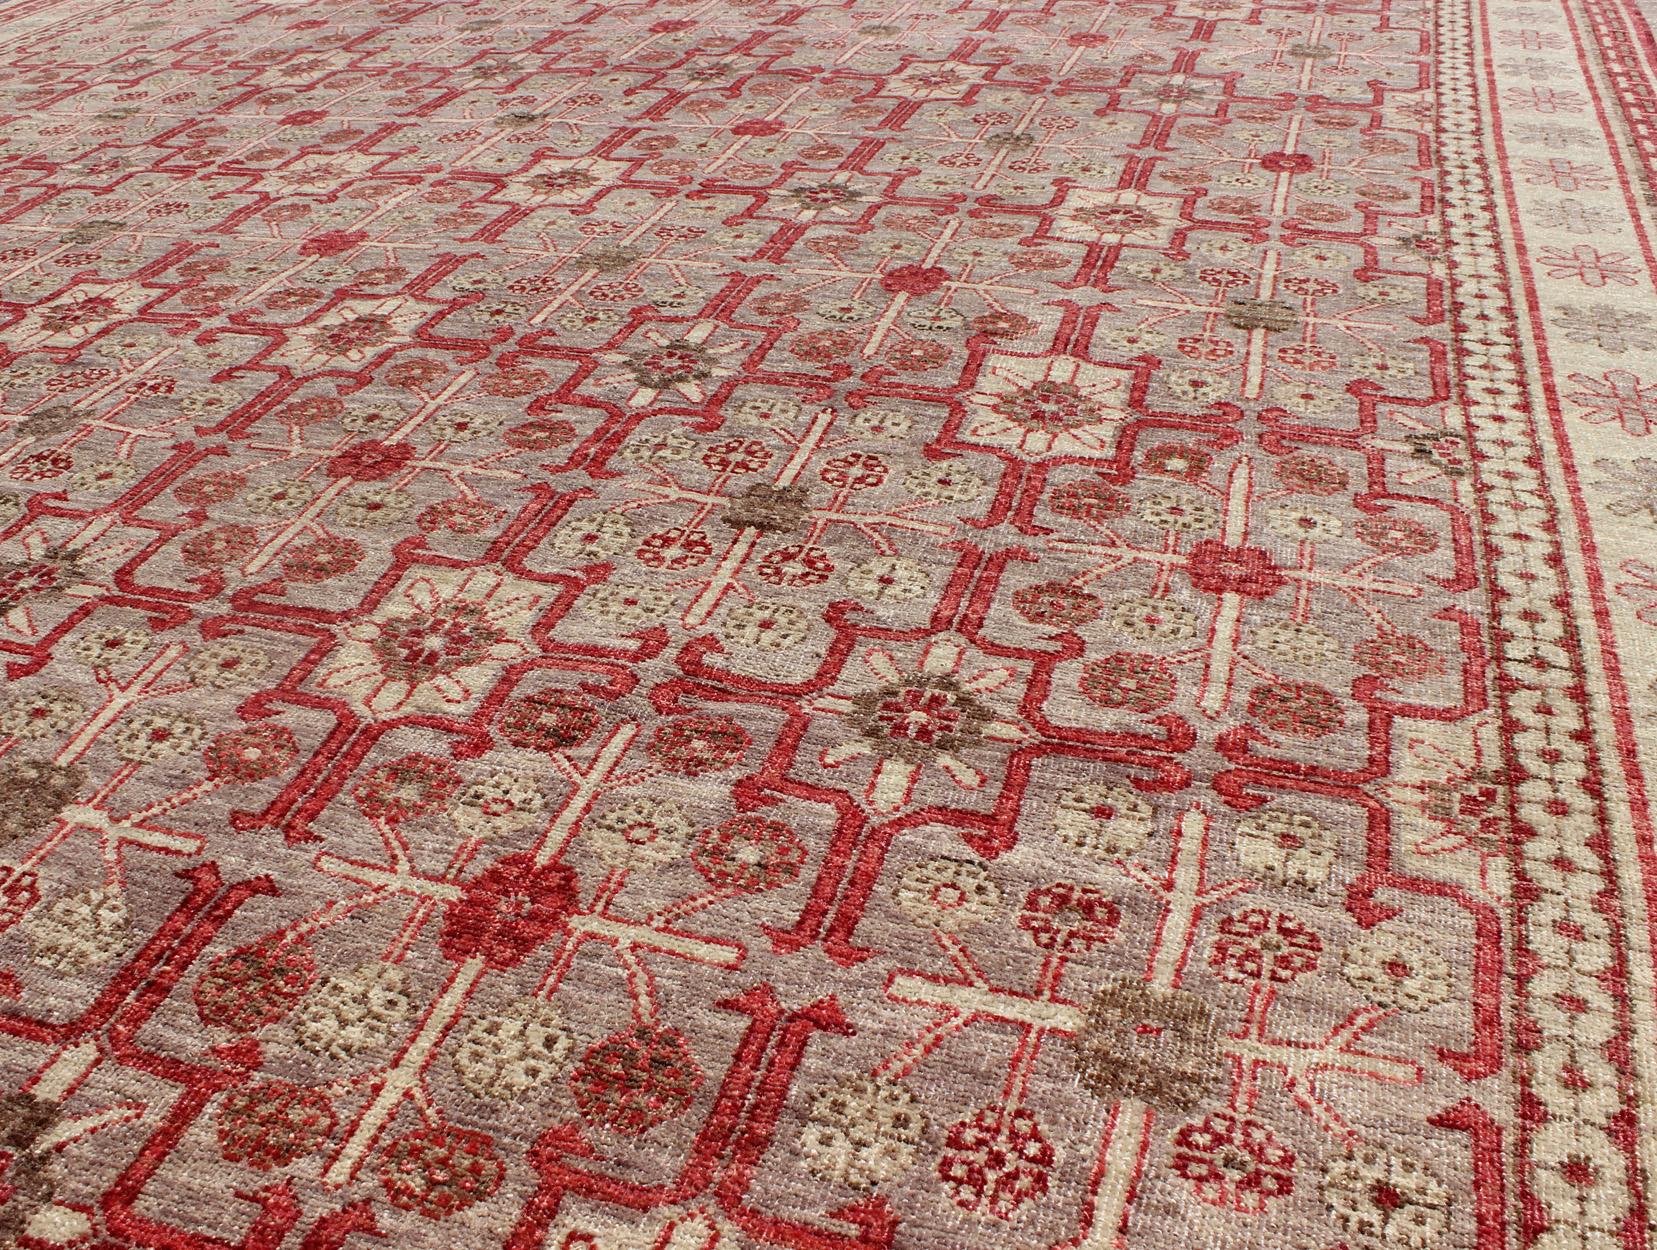 All-Over Khotan Design Rug in Light Gray and Raspberry Background In Excellent Condition For Sale In Atlanta, GA